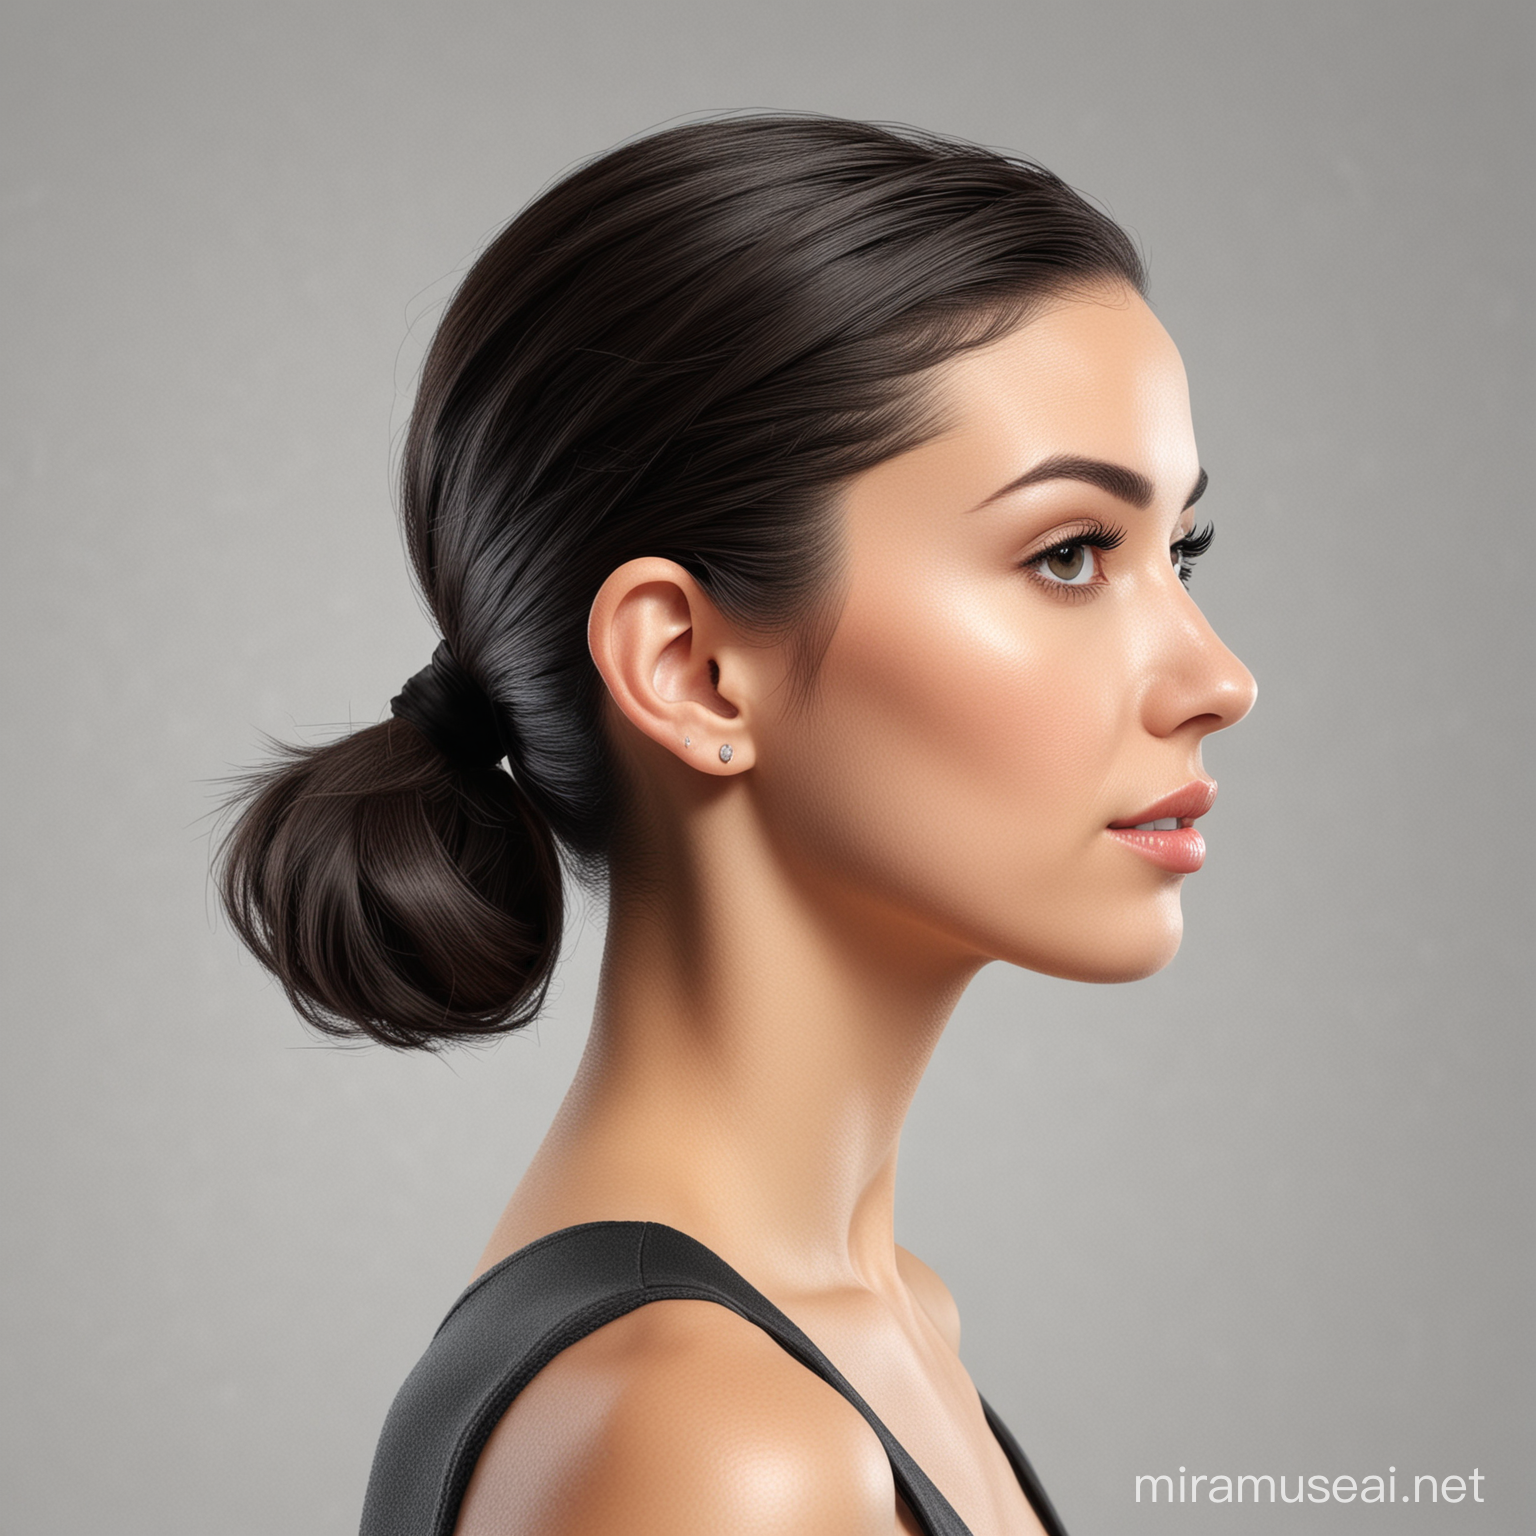 Realistic 3D Portrait Side Profile of Female with Short Dark Bob Hair in Tight Ponytail